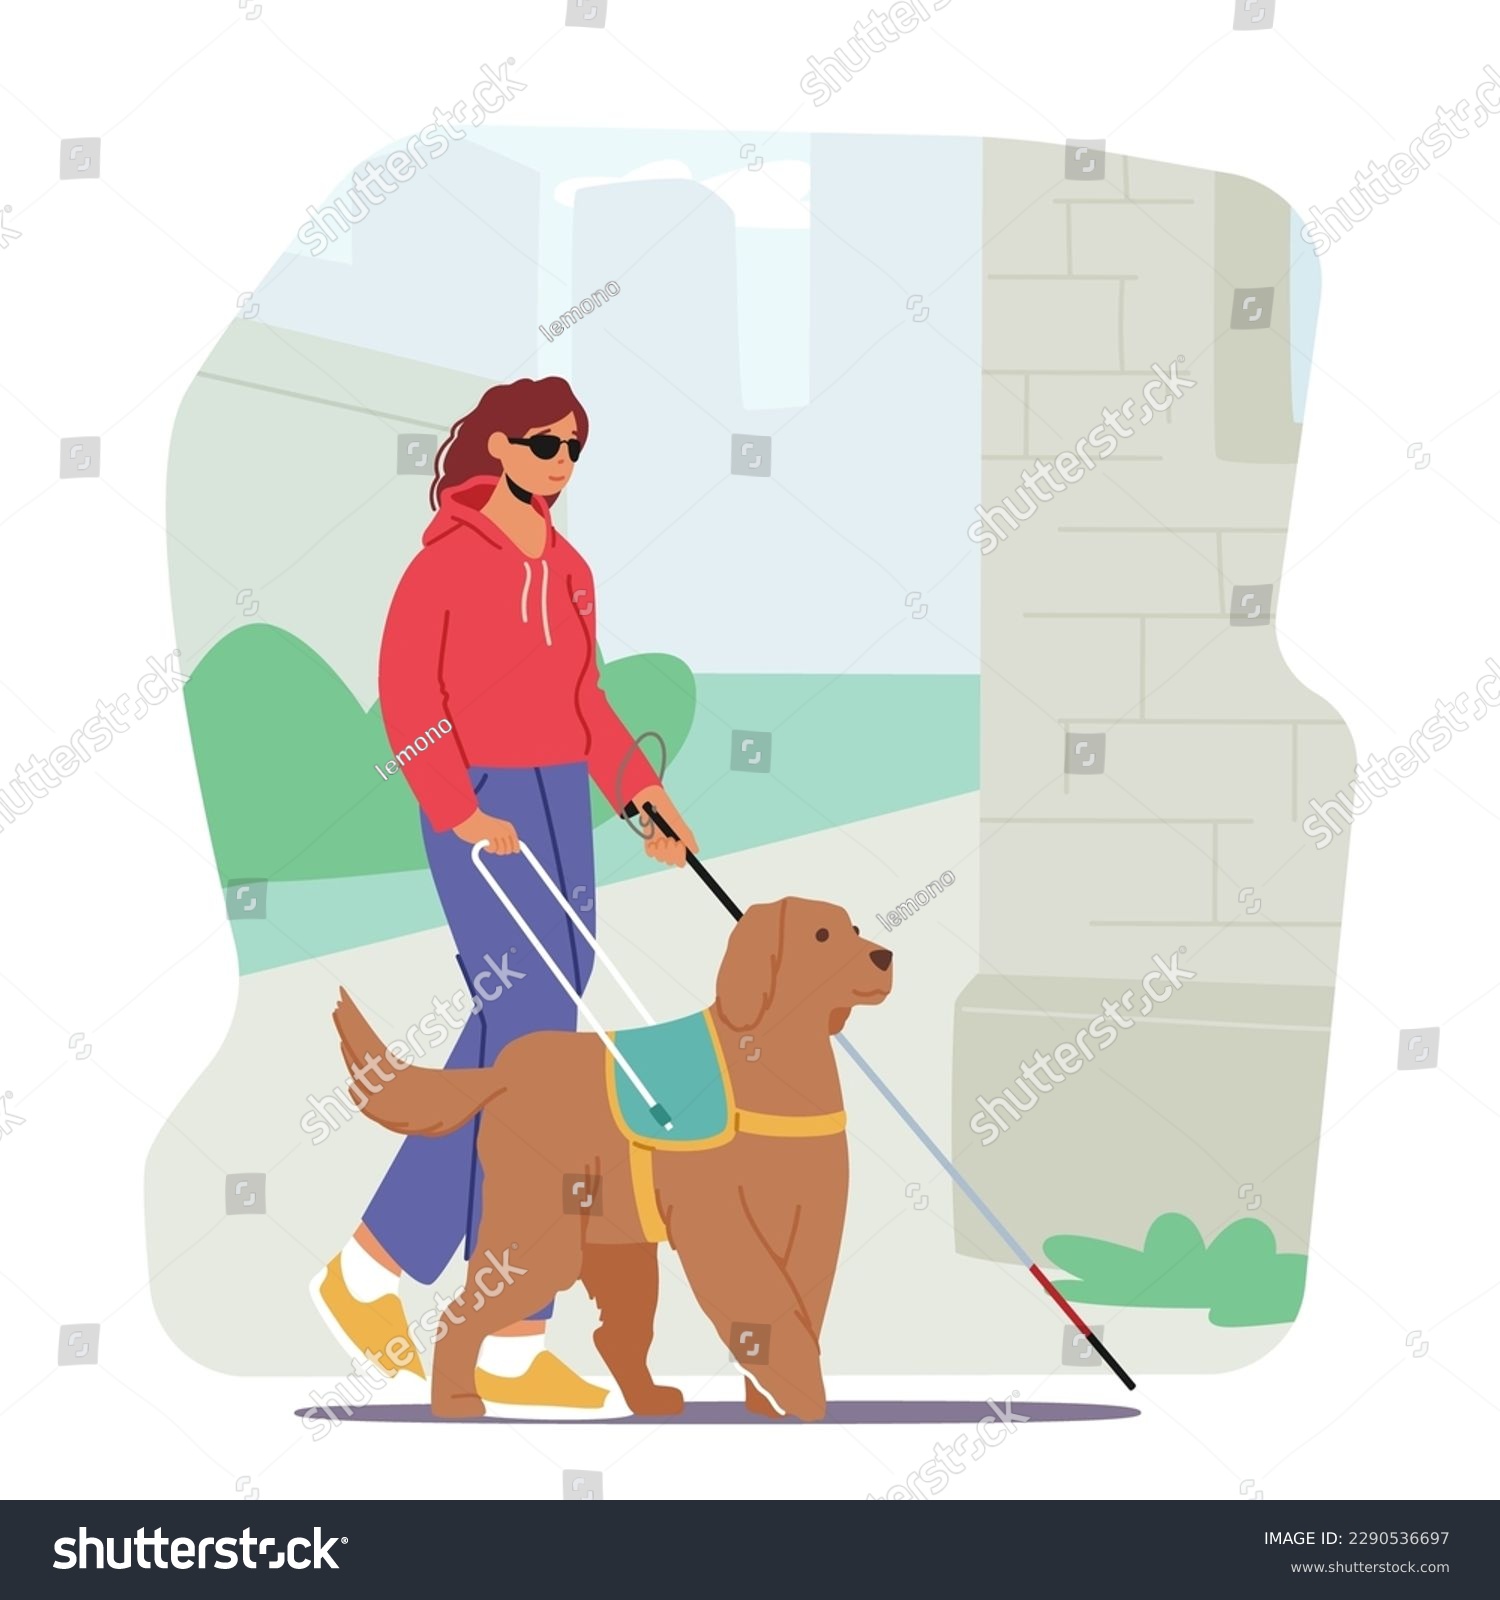 SVG of Blind Female Character With A Guide Dog Walks Confidently Down The Street, With Walking Cane and Dog Leading The Way And The Woman Following Closely. Cartoon People Vector Illustration svg